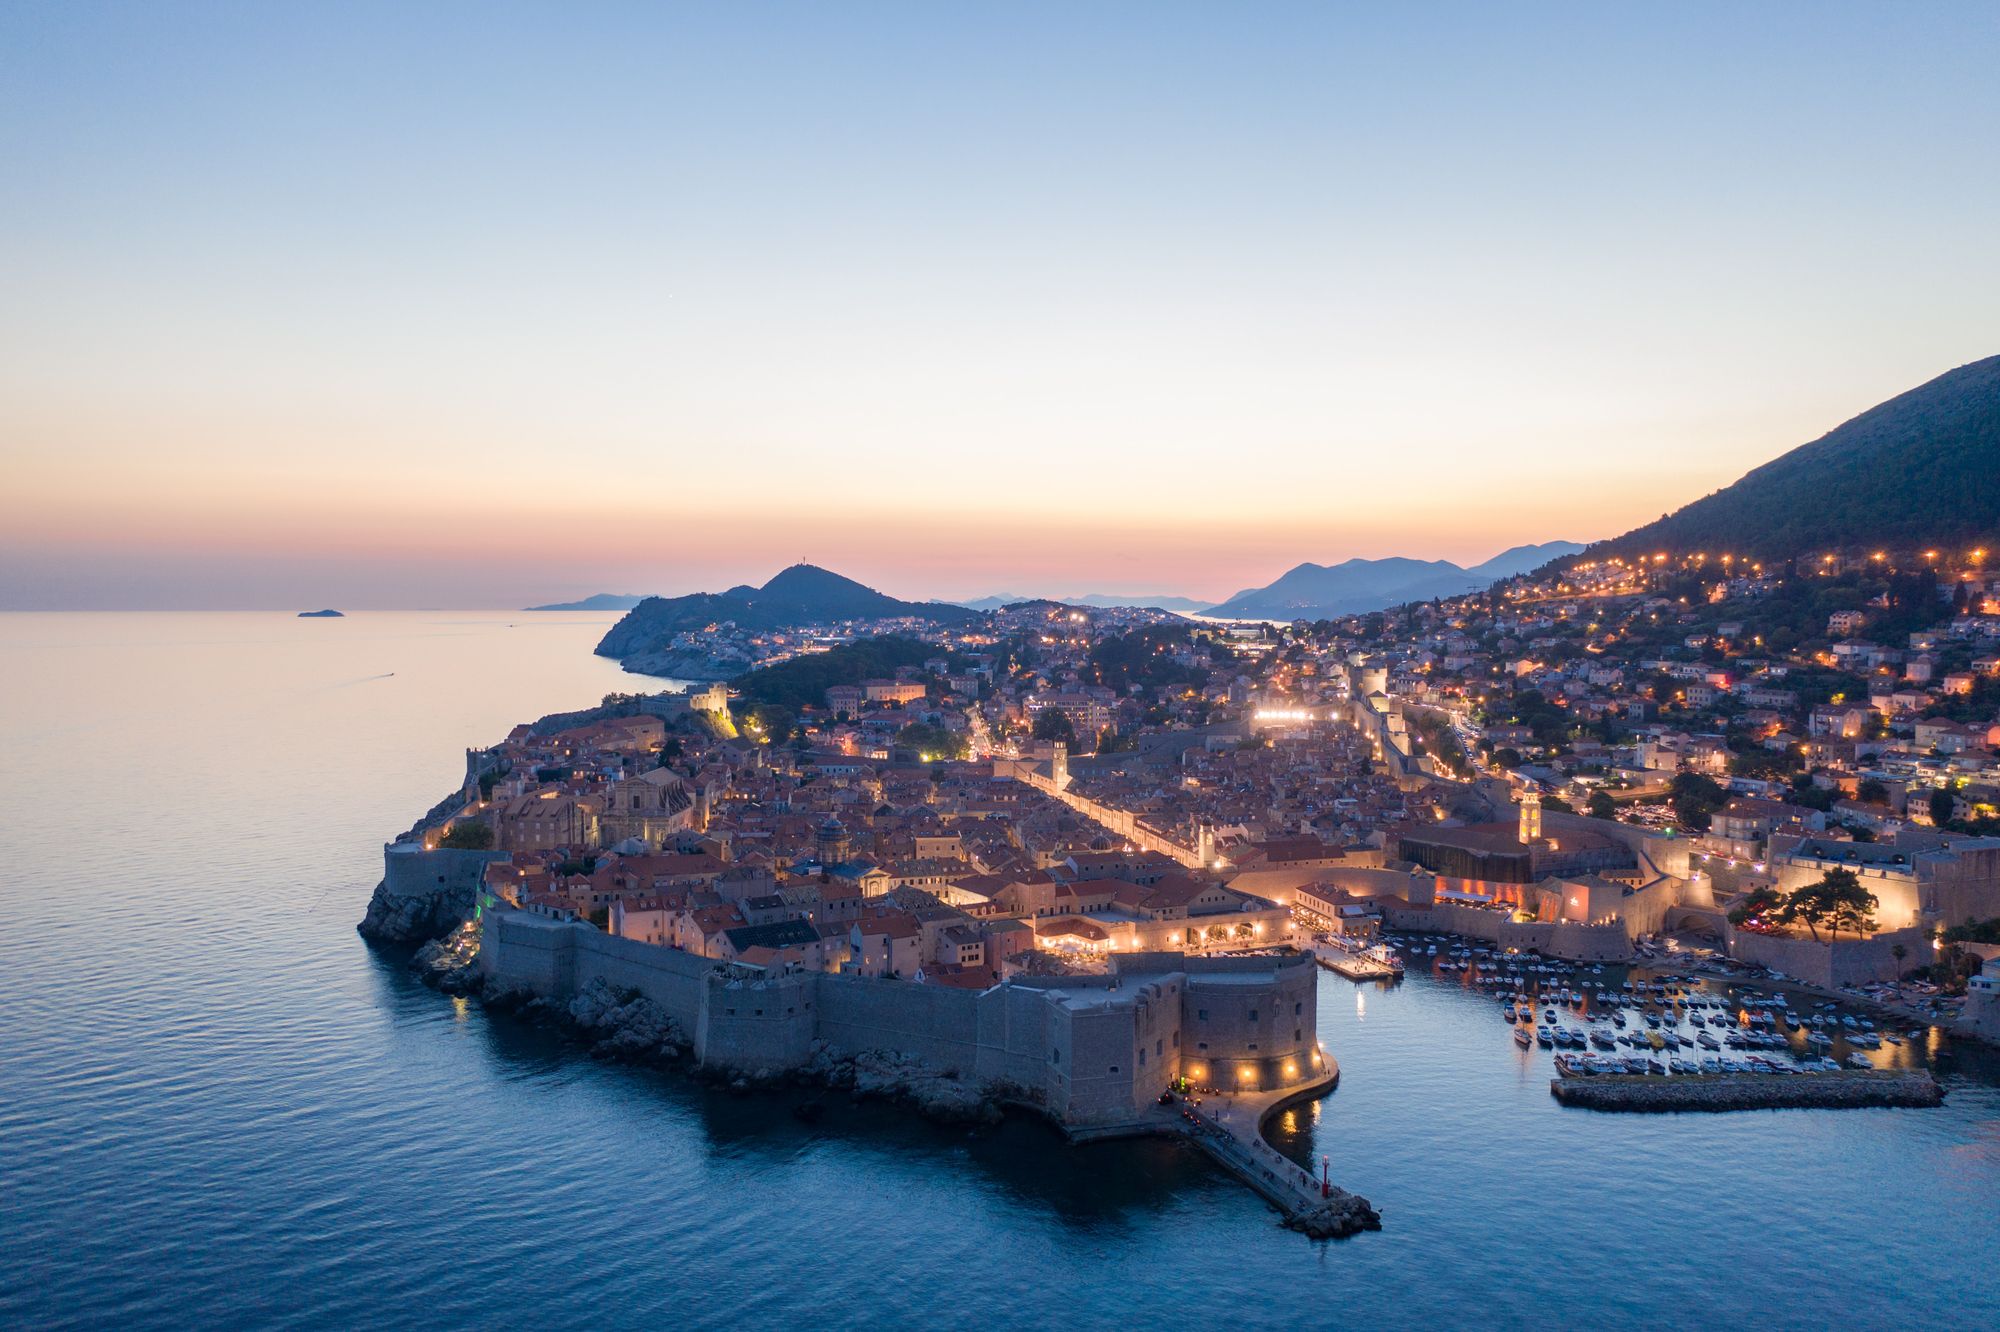 The walled city of Dubrovnik at sunset in Croatia